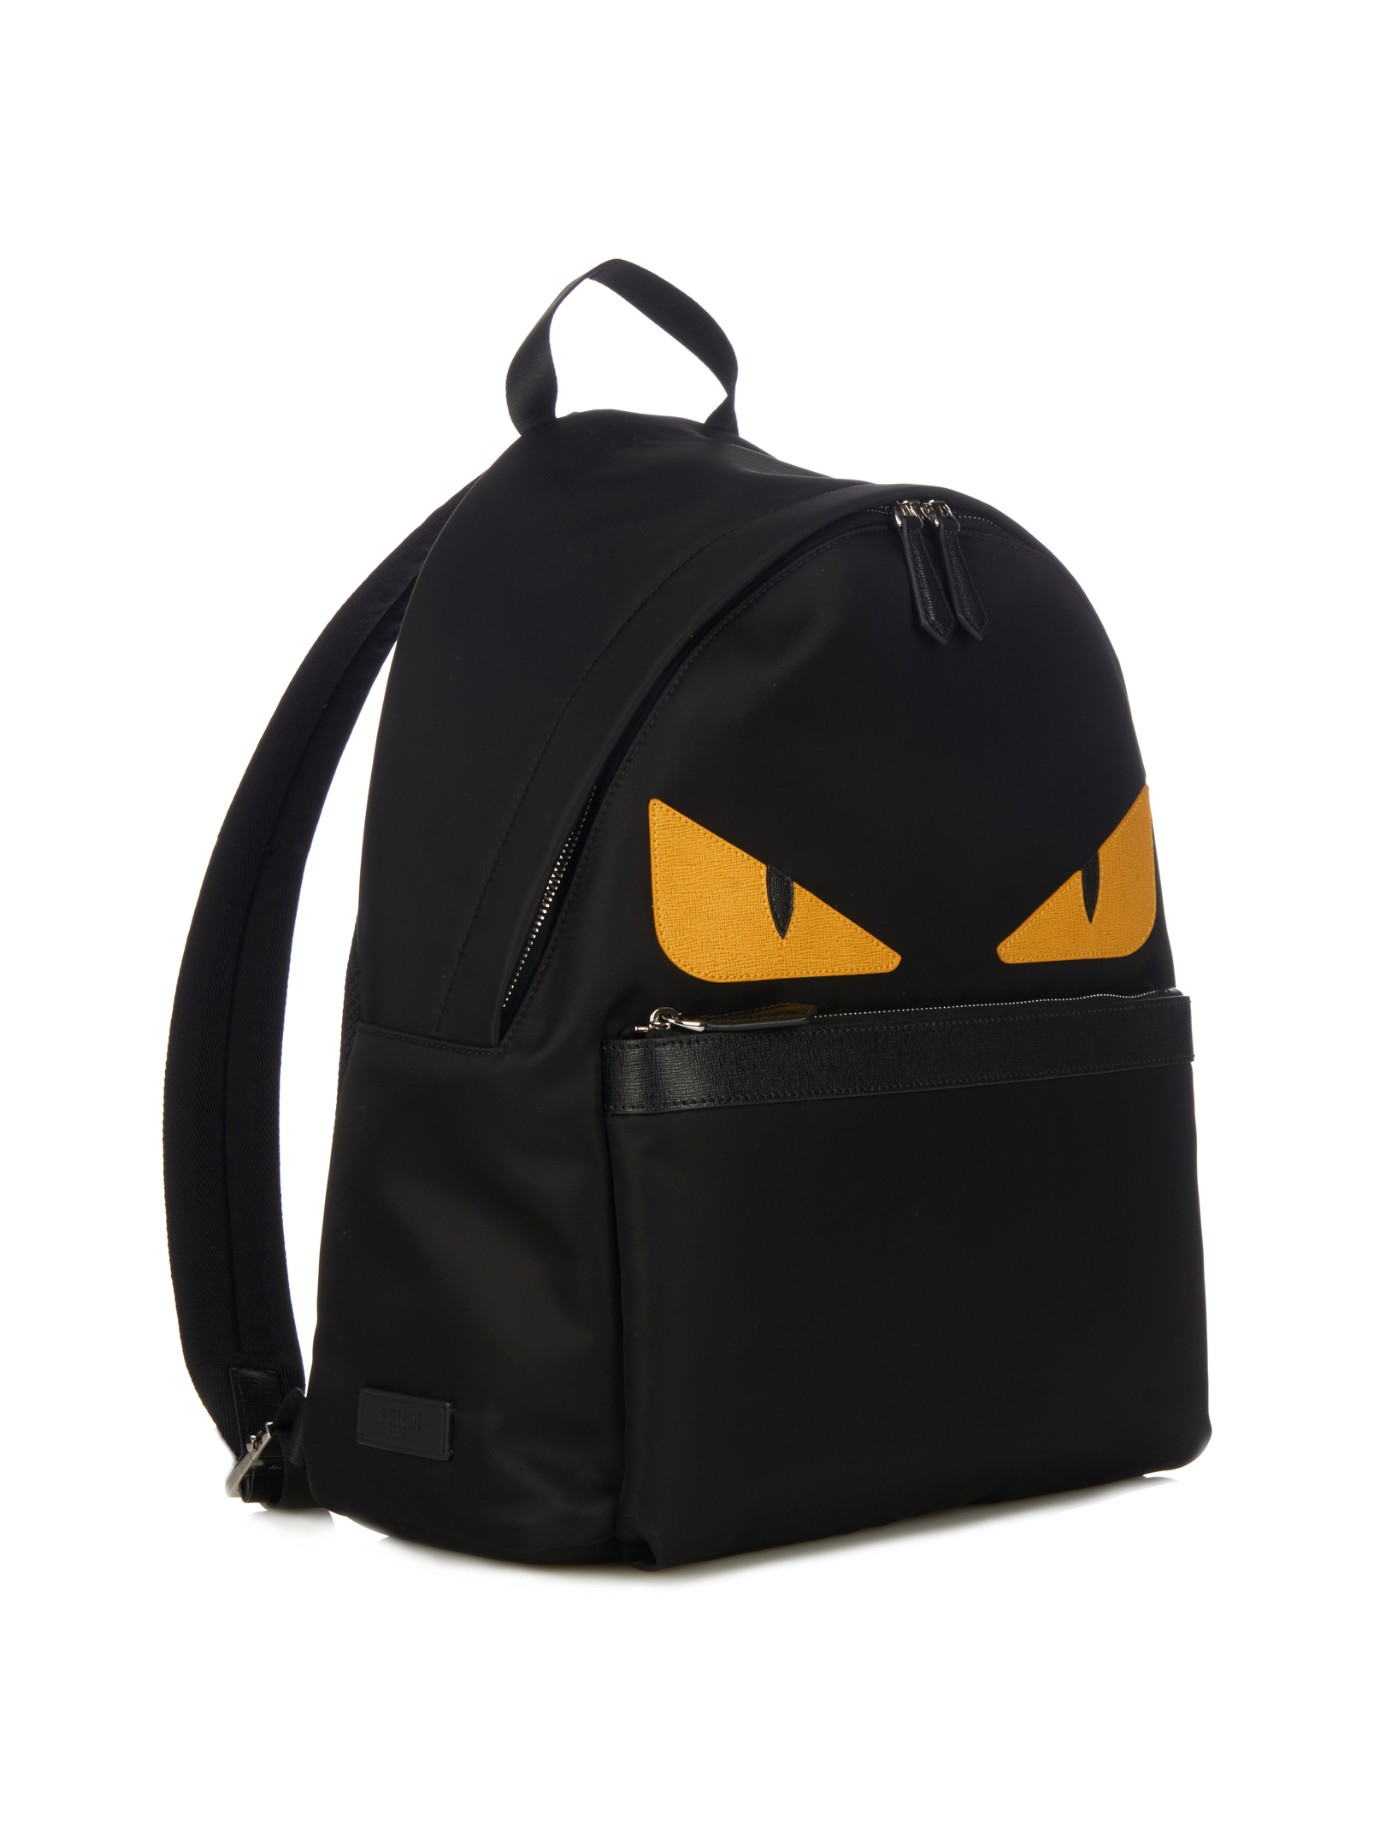 Fendi Synthetic Bag Bugs Nylon And Leather Backpack in Black for Men - Lyst